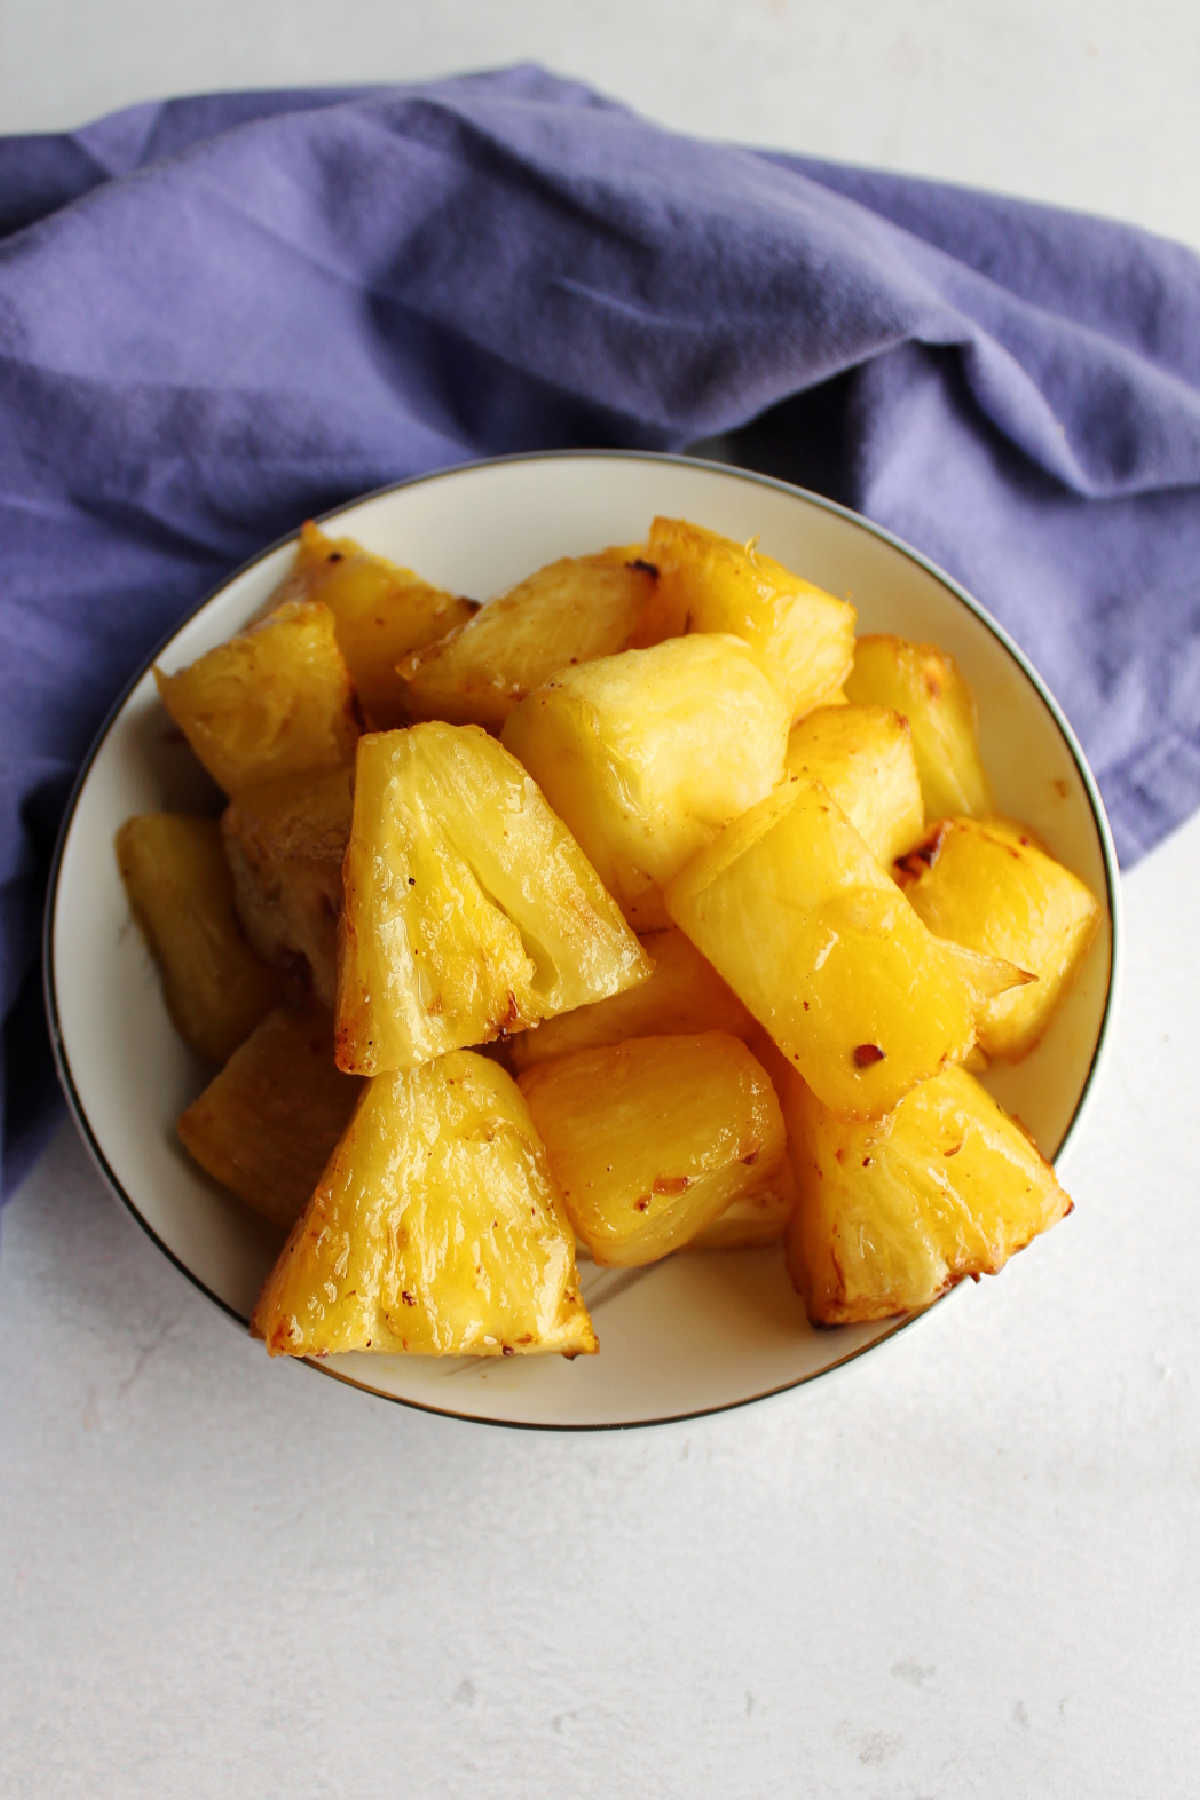 Bowl of glossy butter and brown sugar coated pineapple that has been cooked in an air fryer.